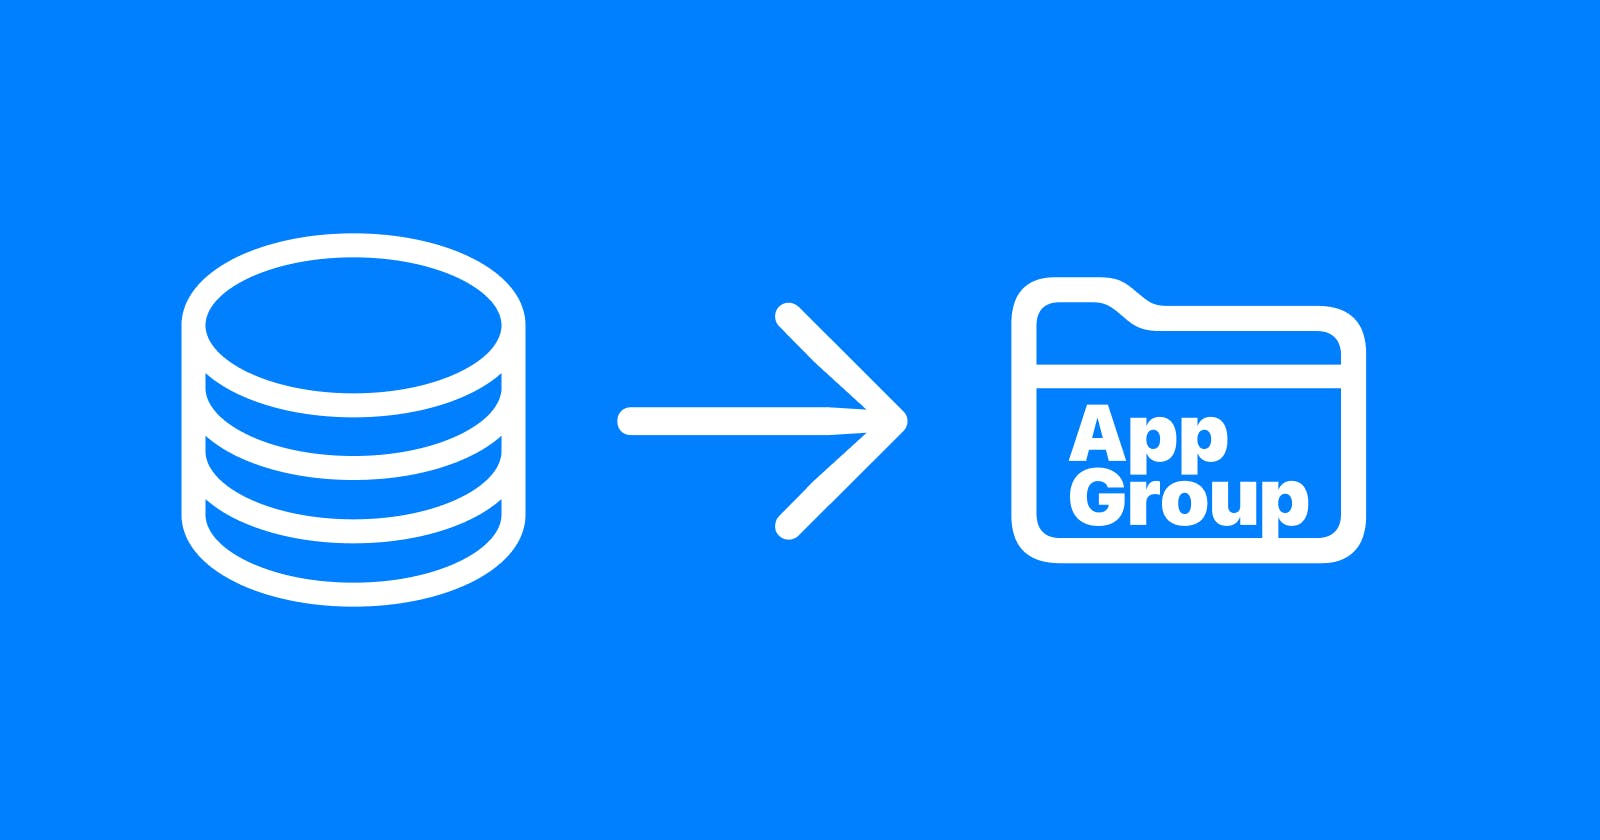 How to migrate NSPersistentCloudKitContainer to App Groups